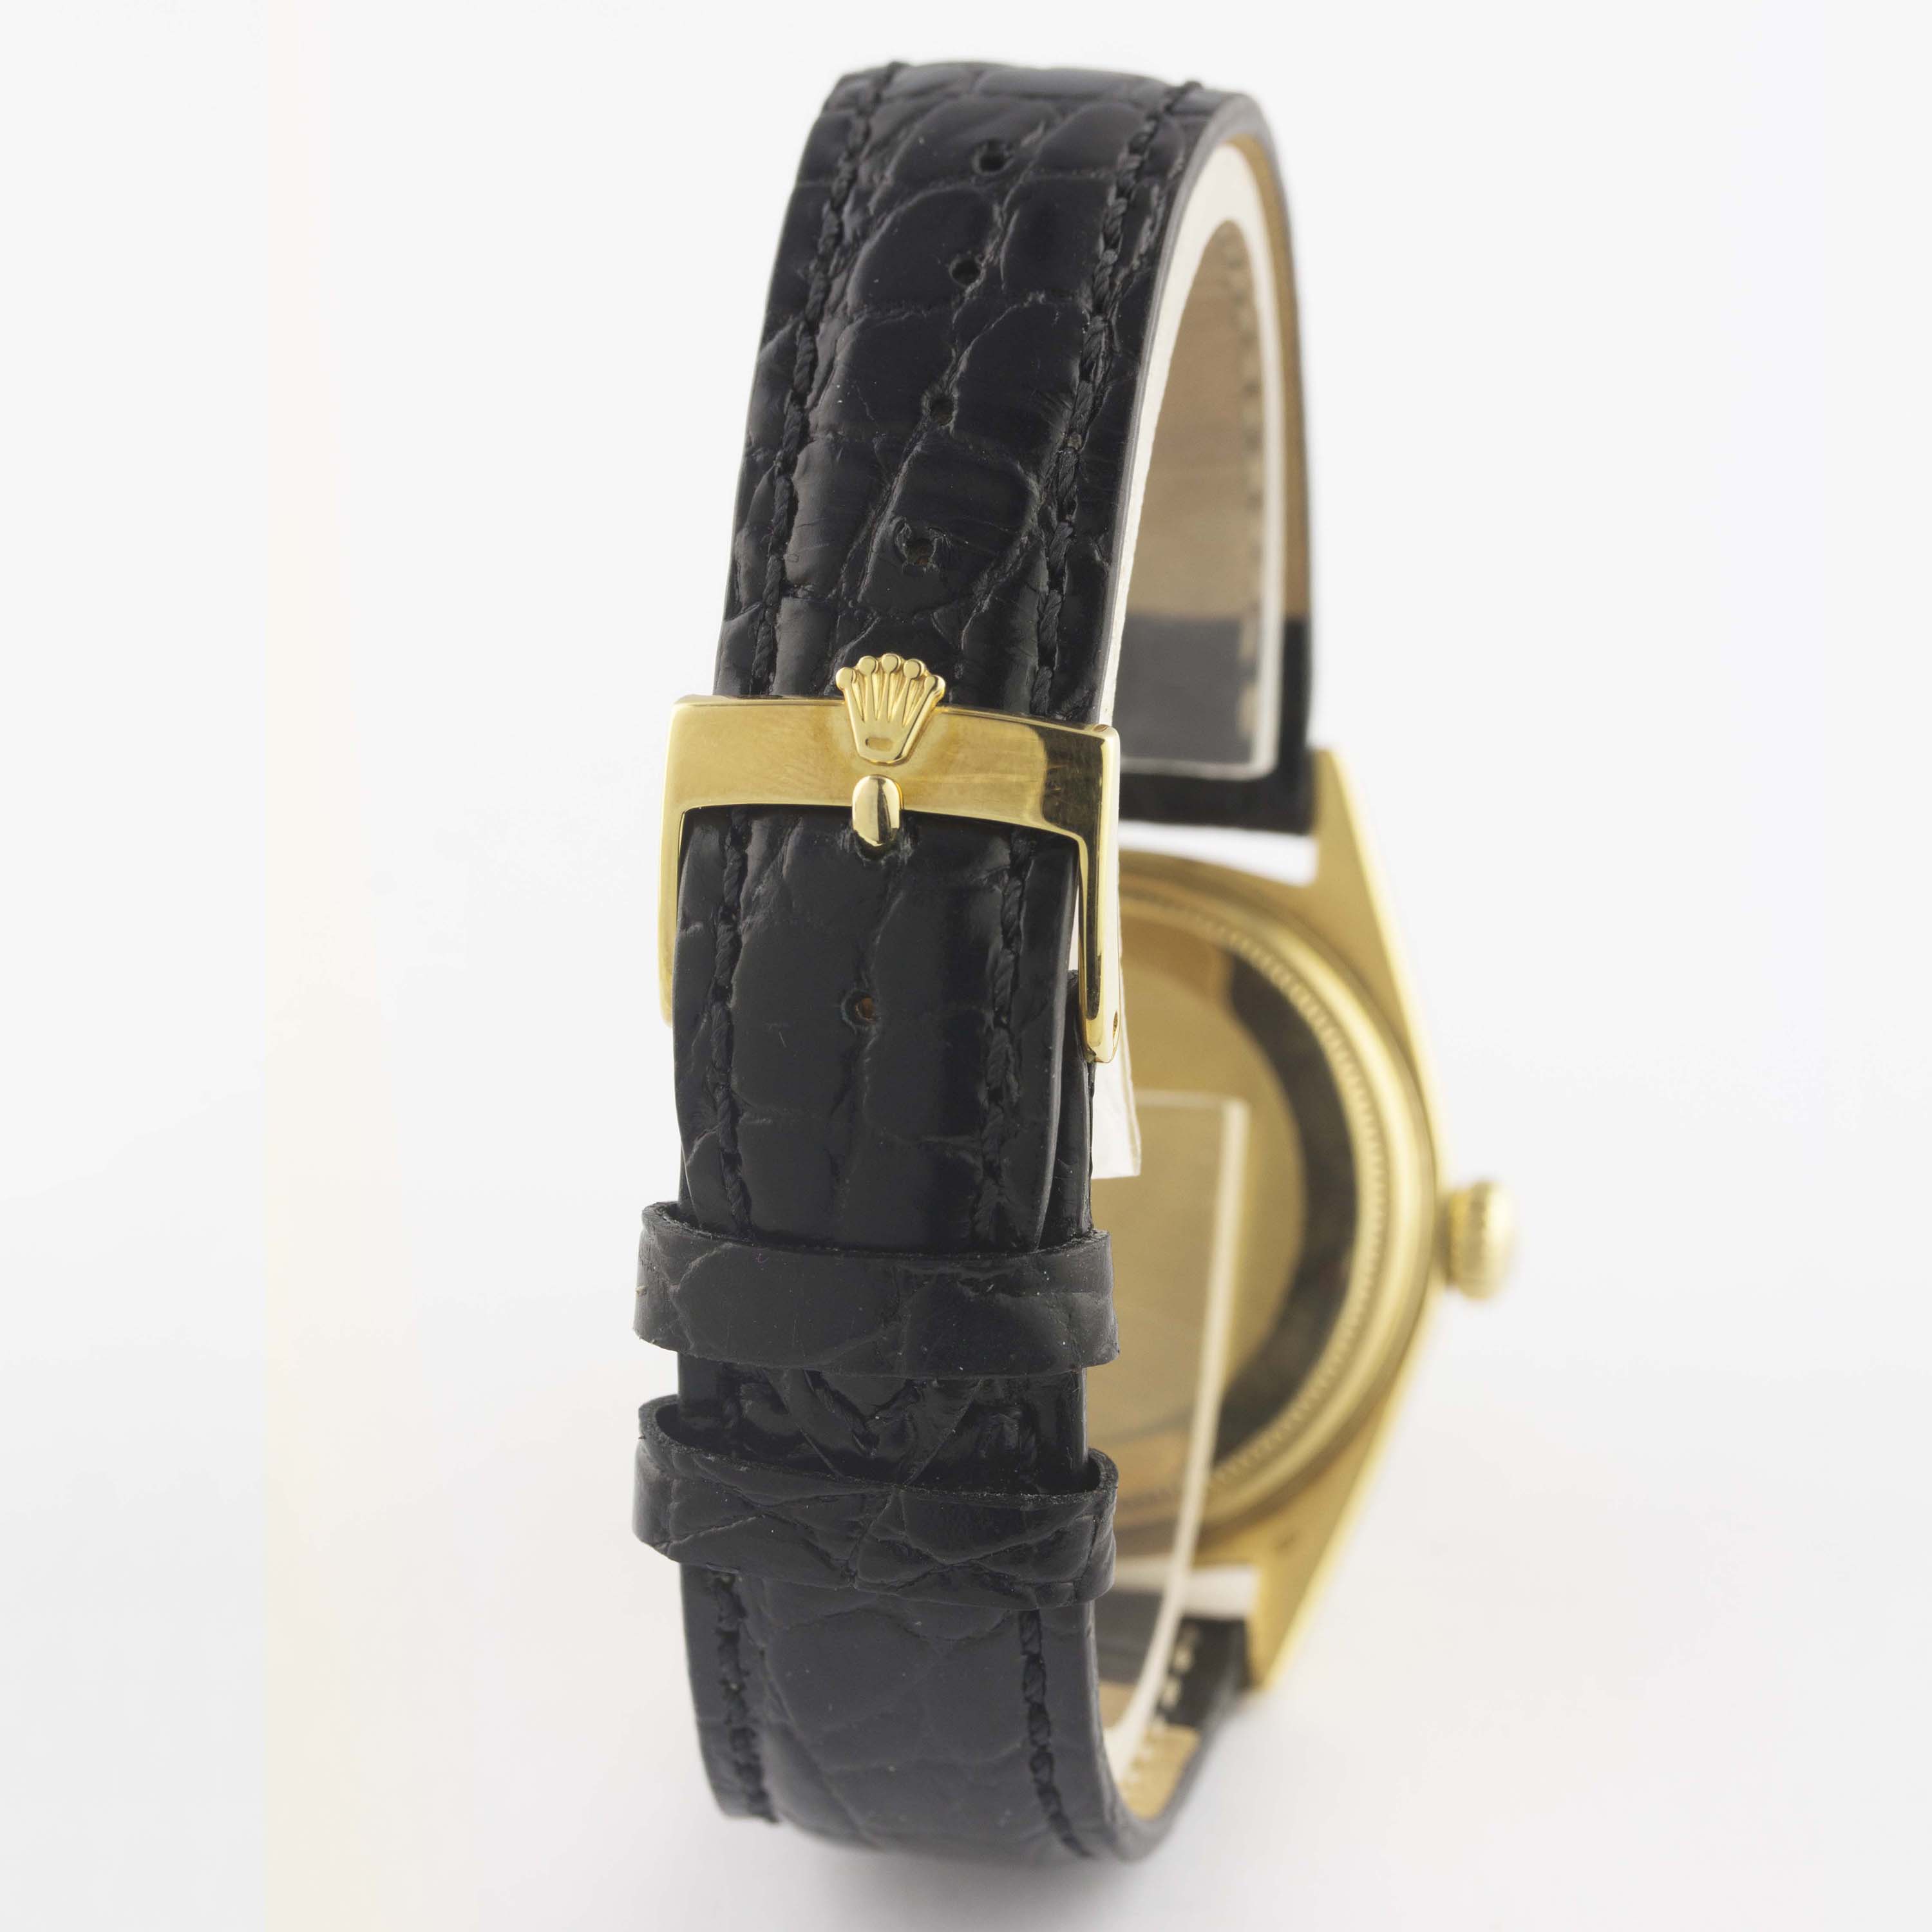 A RARE GENTLEMAN'S 18K SOLID GOLD ROLEX OYSTER PERPETUAL DAY DATE WRIST WATCH CIRCA 1972, REF. - Image 6 of 11